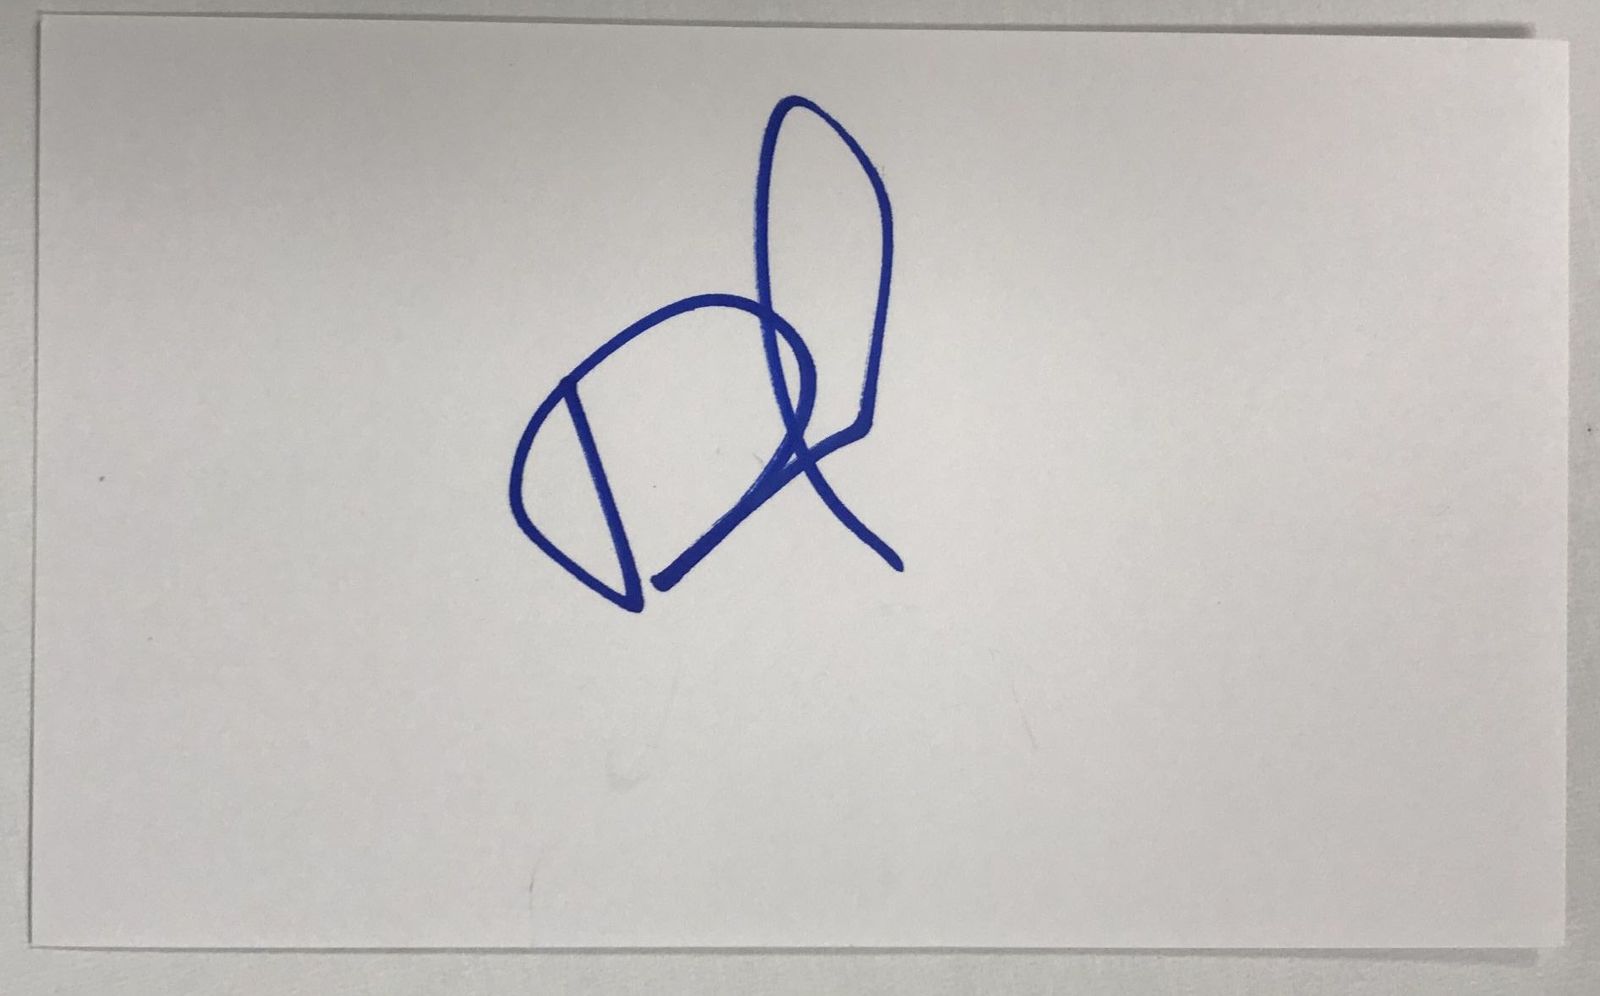 Primary image for Dave Grohl Signed Autographed 3x5 Index Card - HOLO COA